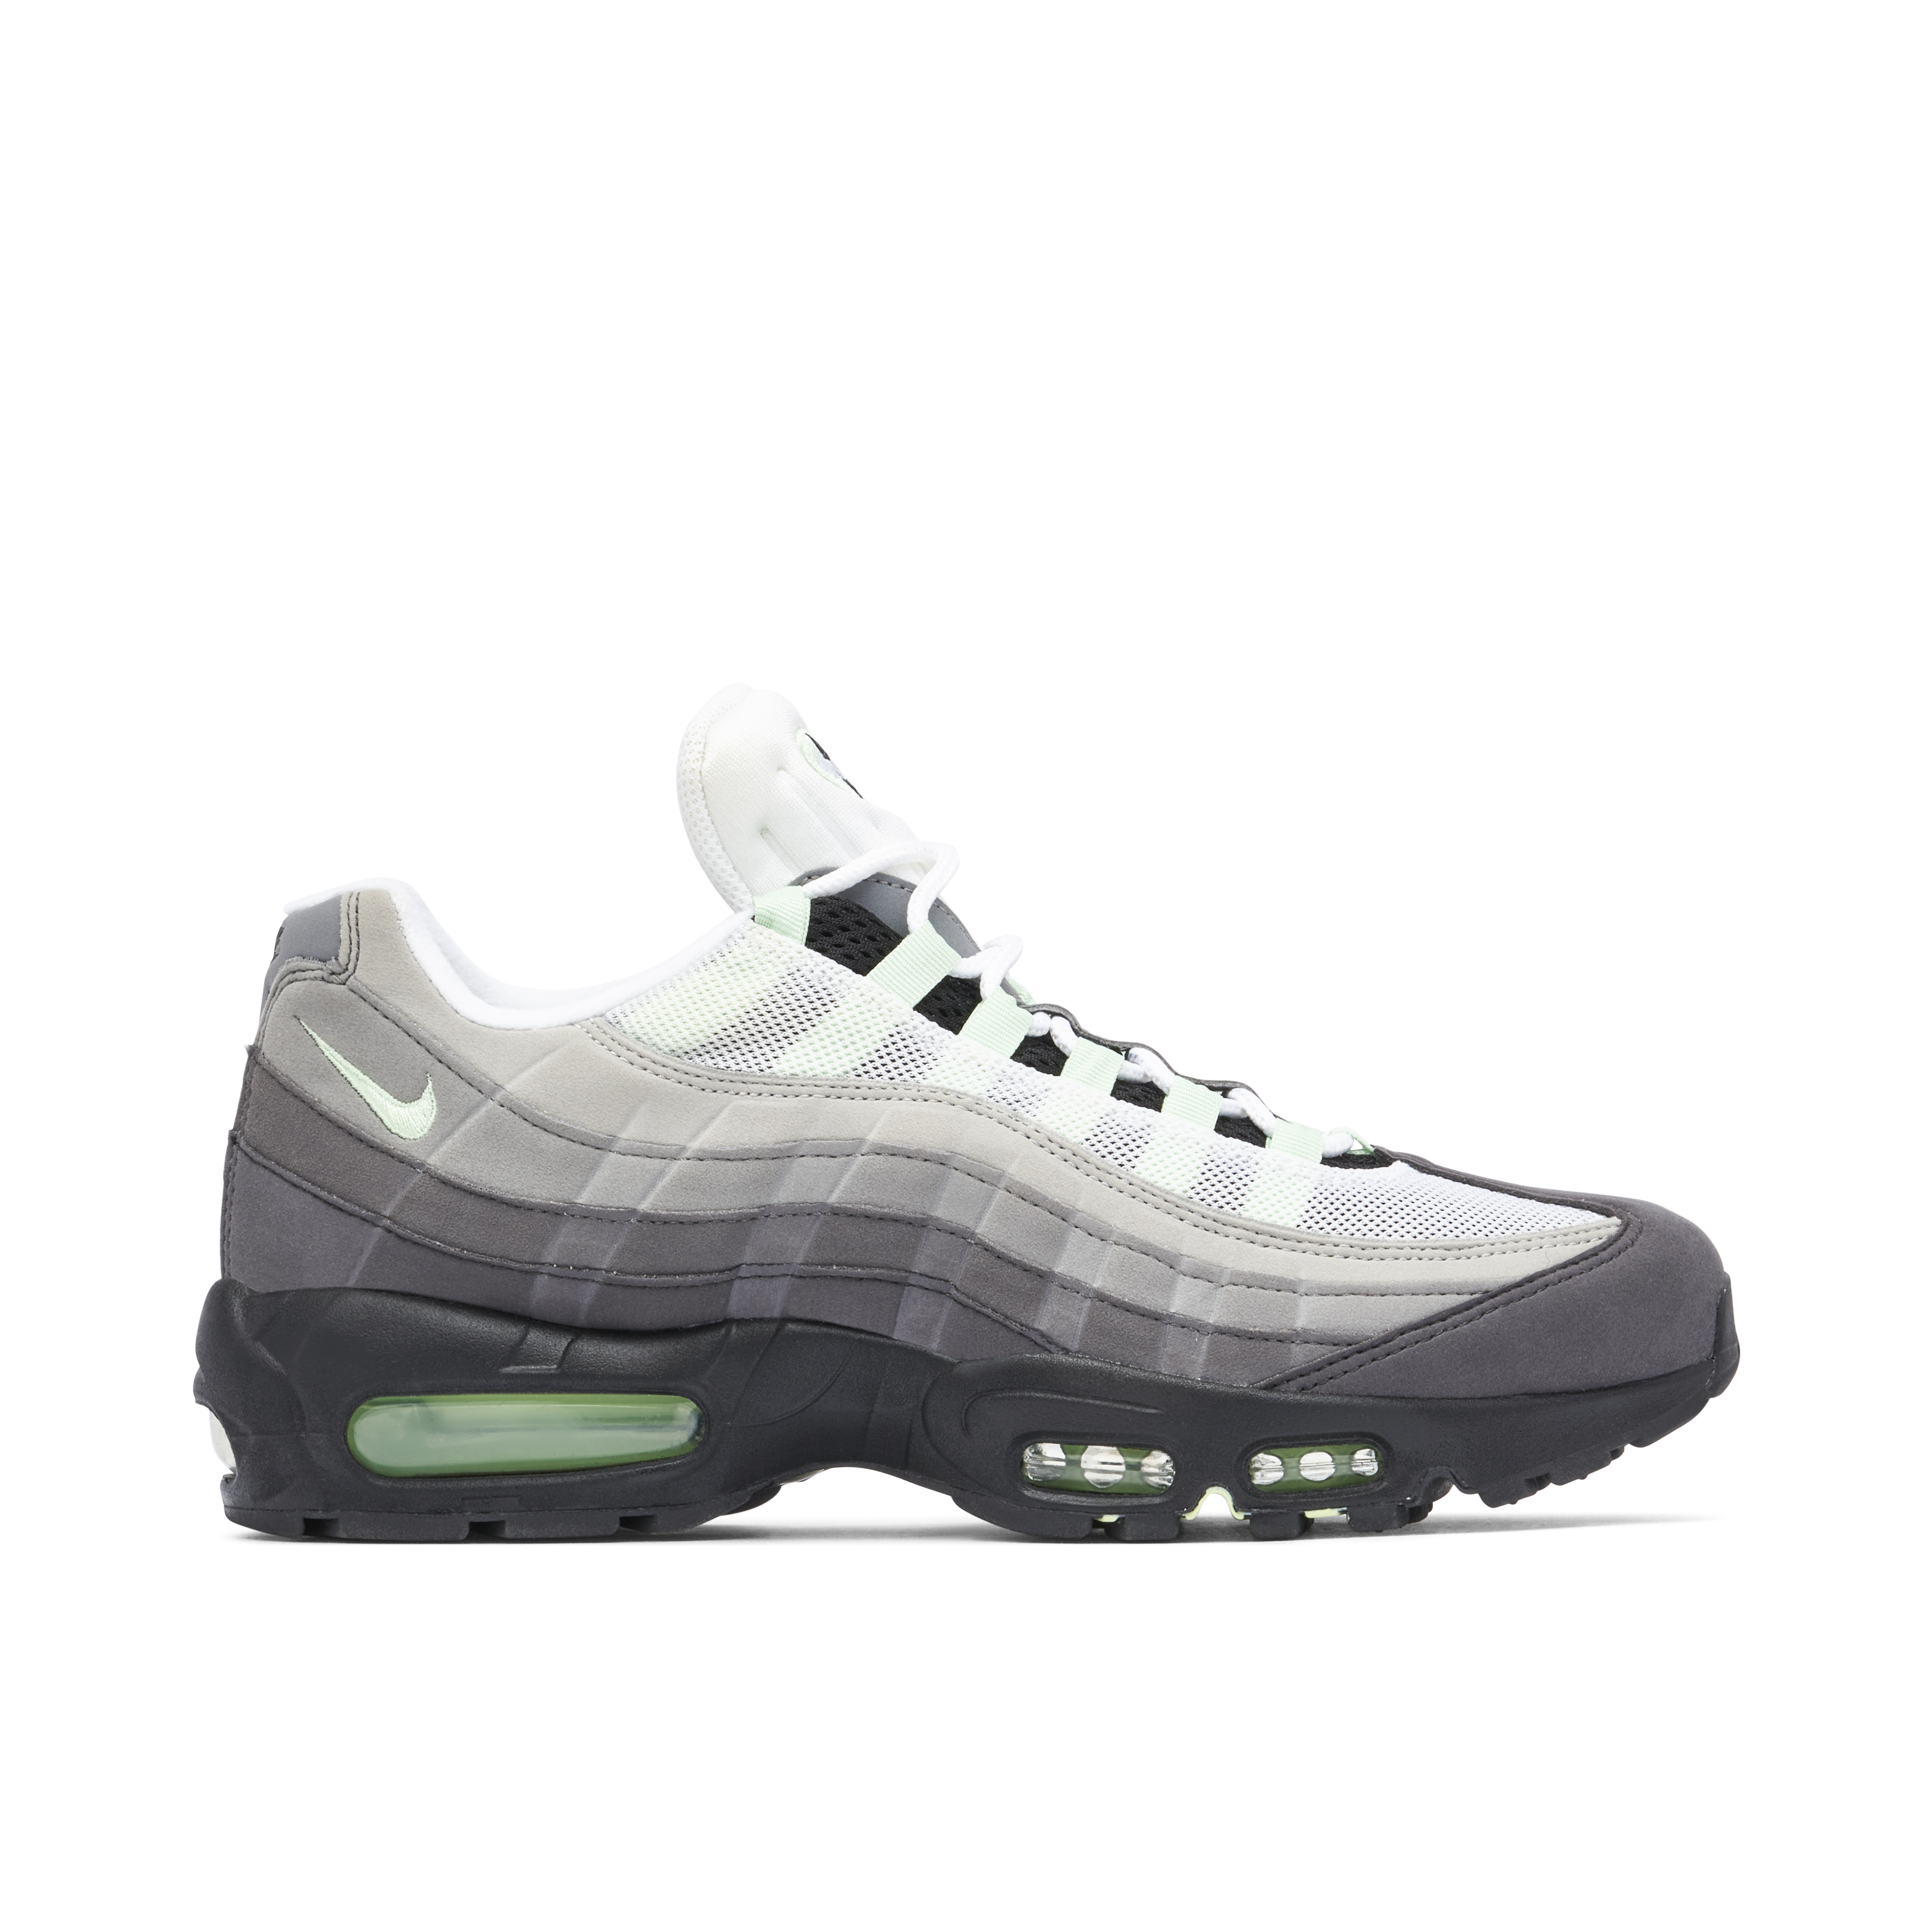 Nike Air Max 95 OG Neon | CT1689-001 | Laced